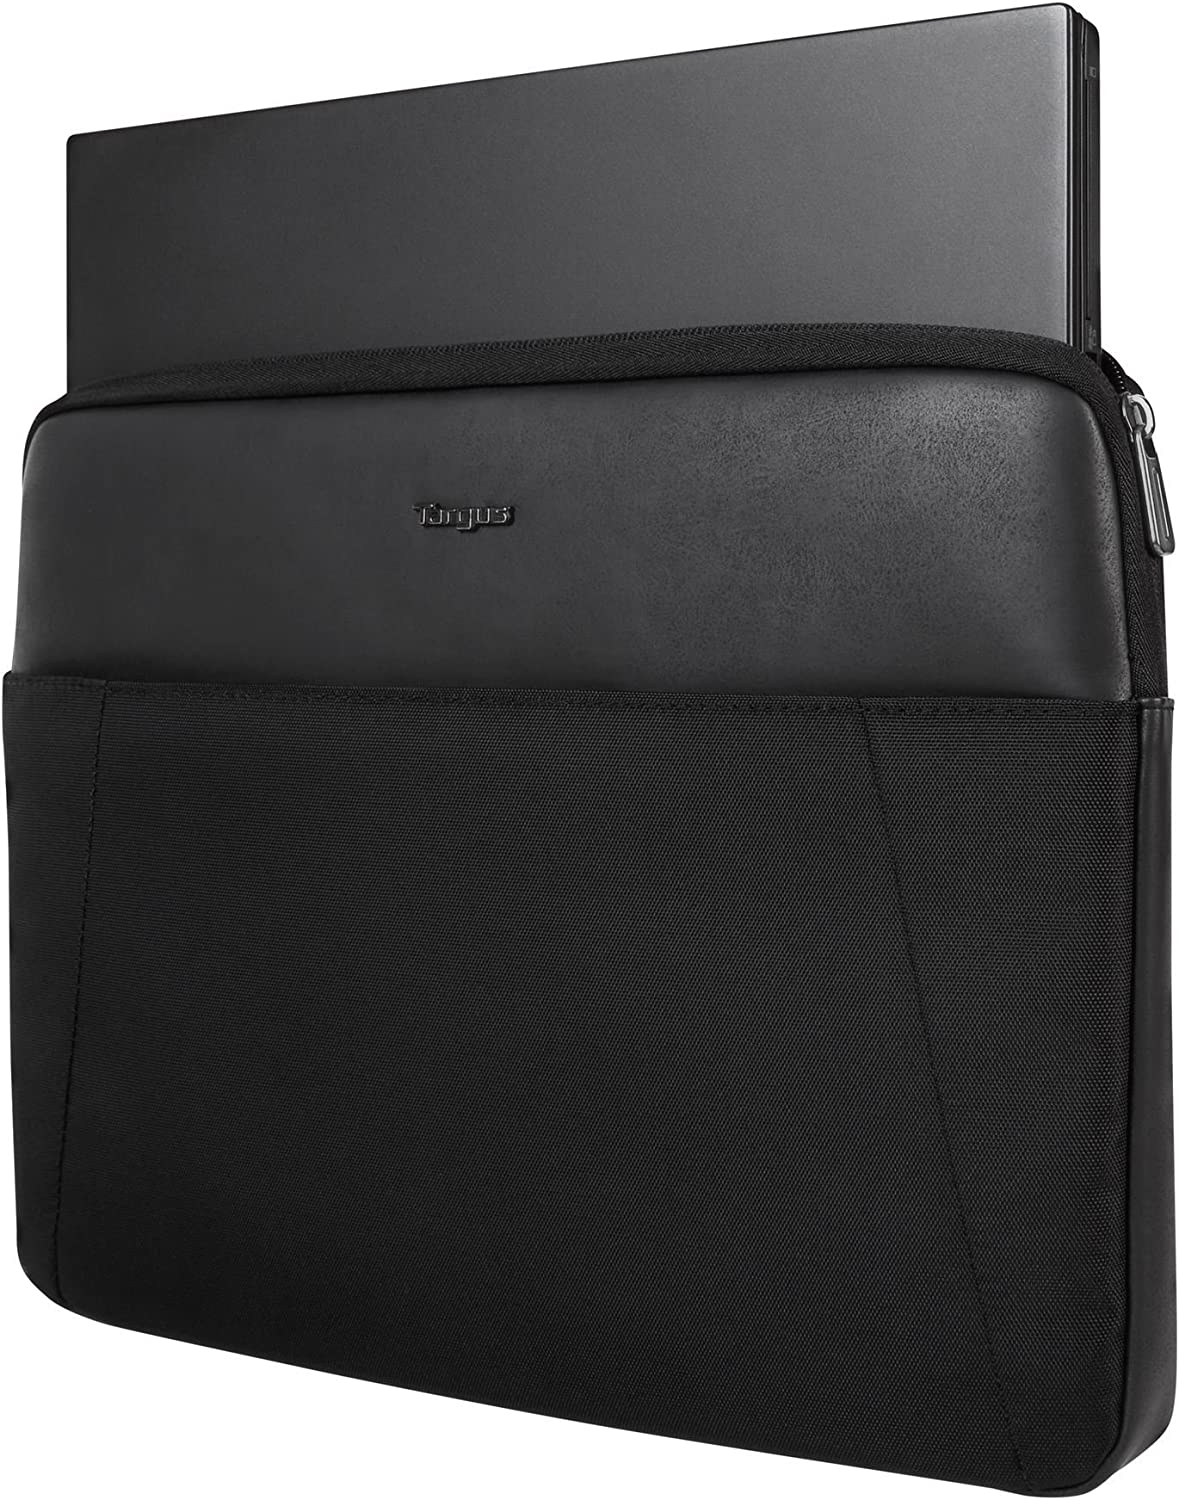 Targus Corporate Traveler Checkpoint-Friendly Professional Business Laptop Sleeve with Durable Water Resistant Nylon, Sternum Strap 14-Inch Laptop, Black (TSS966GL) Sleeve 14 inch